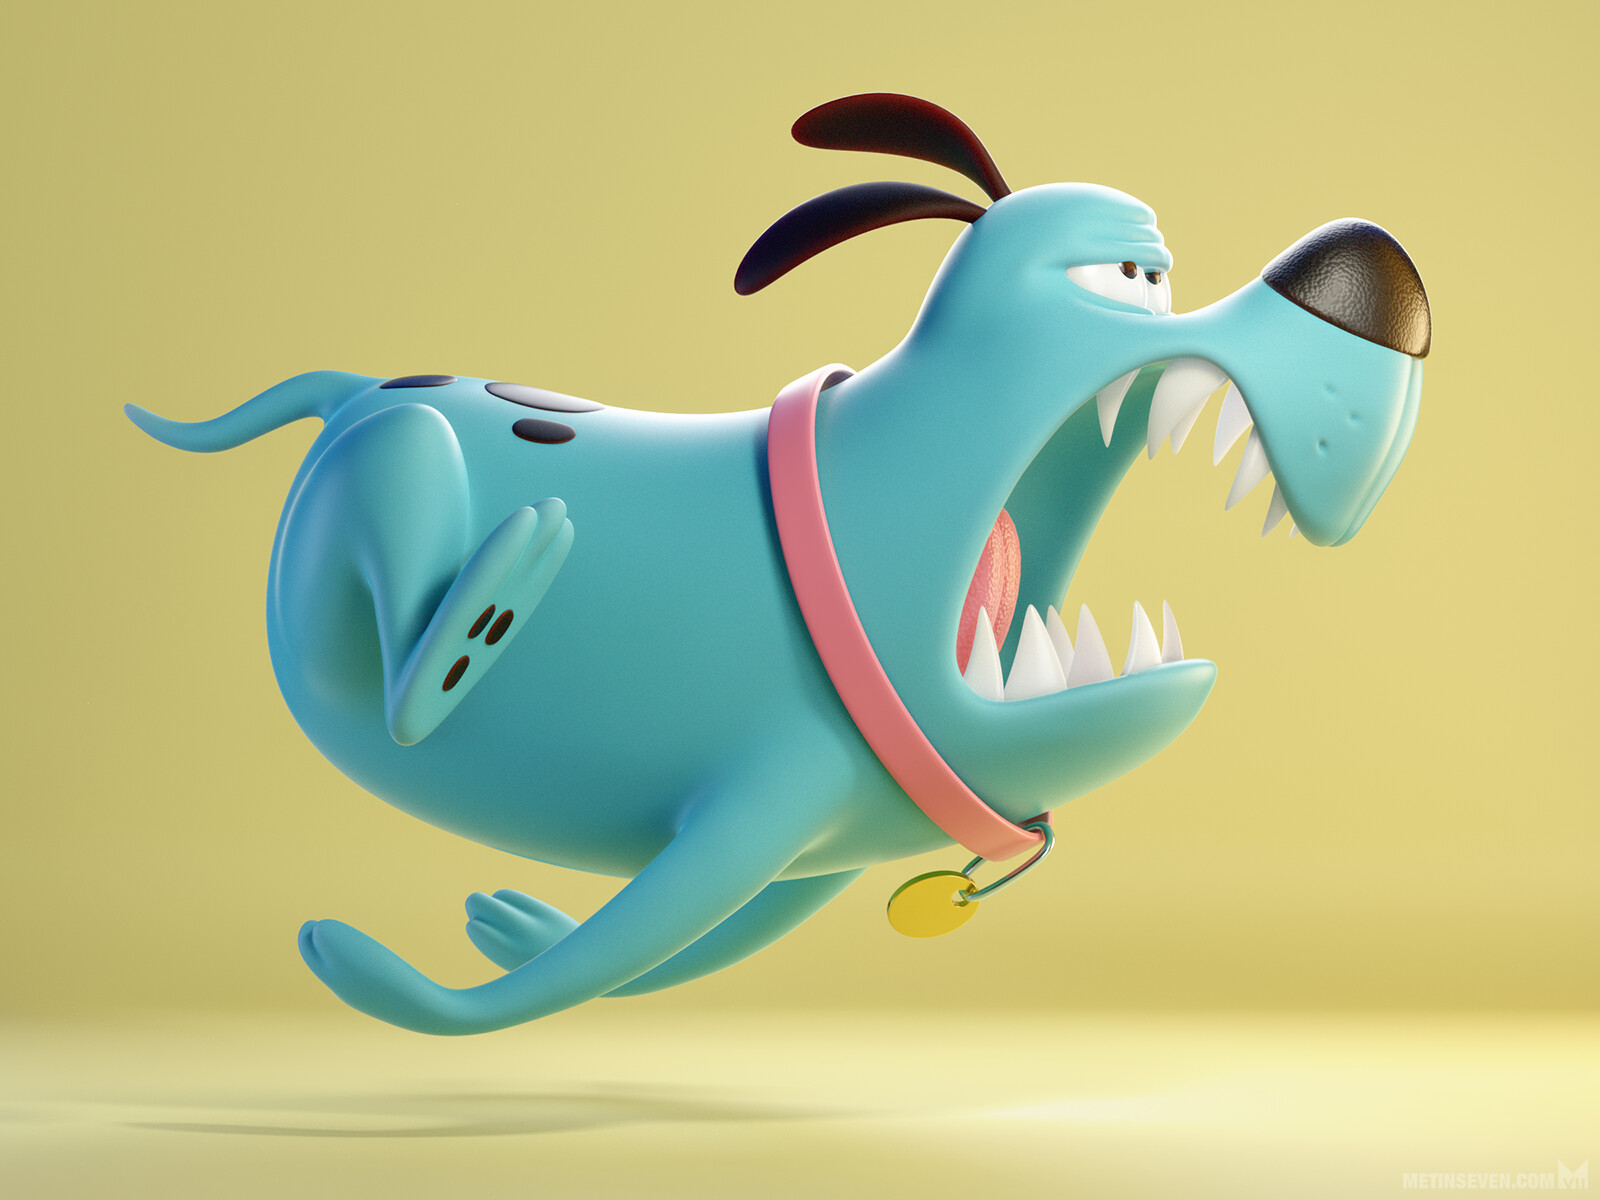 3D character model of a cartoon-style dog | Based on a drawing by Mark Christiansen